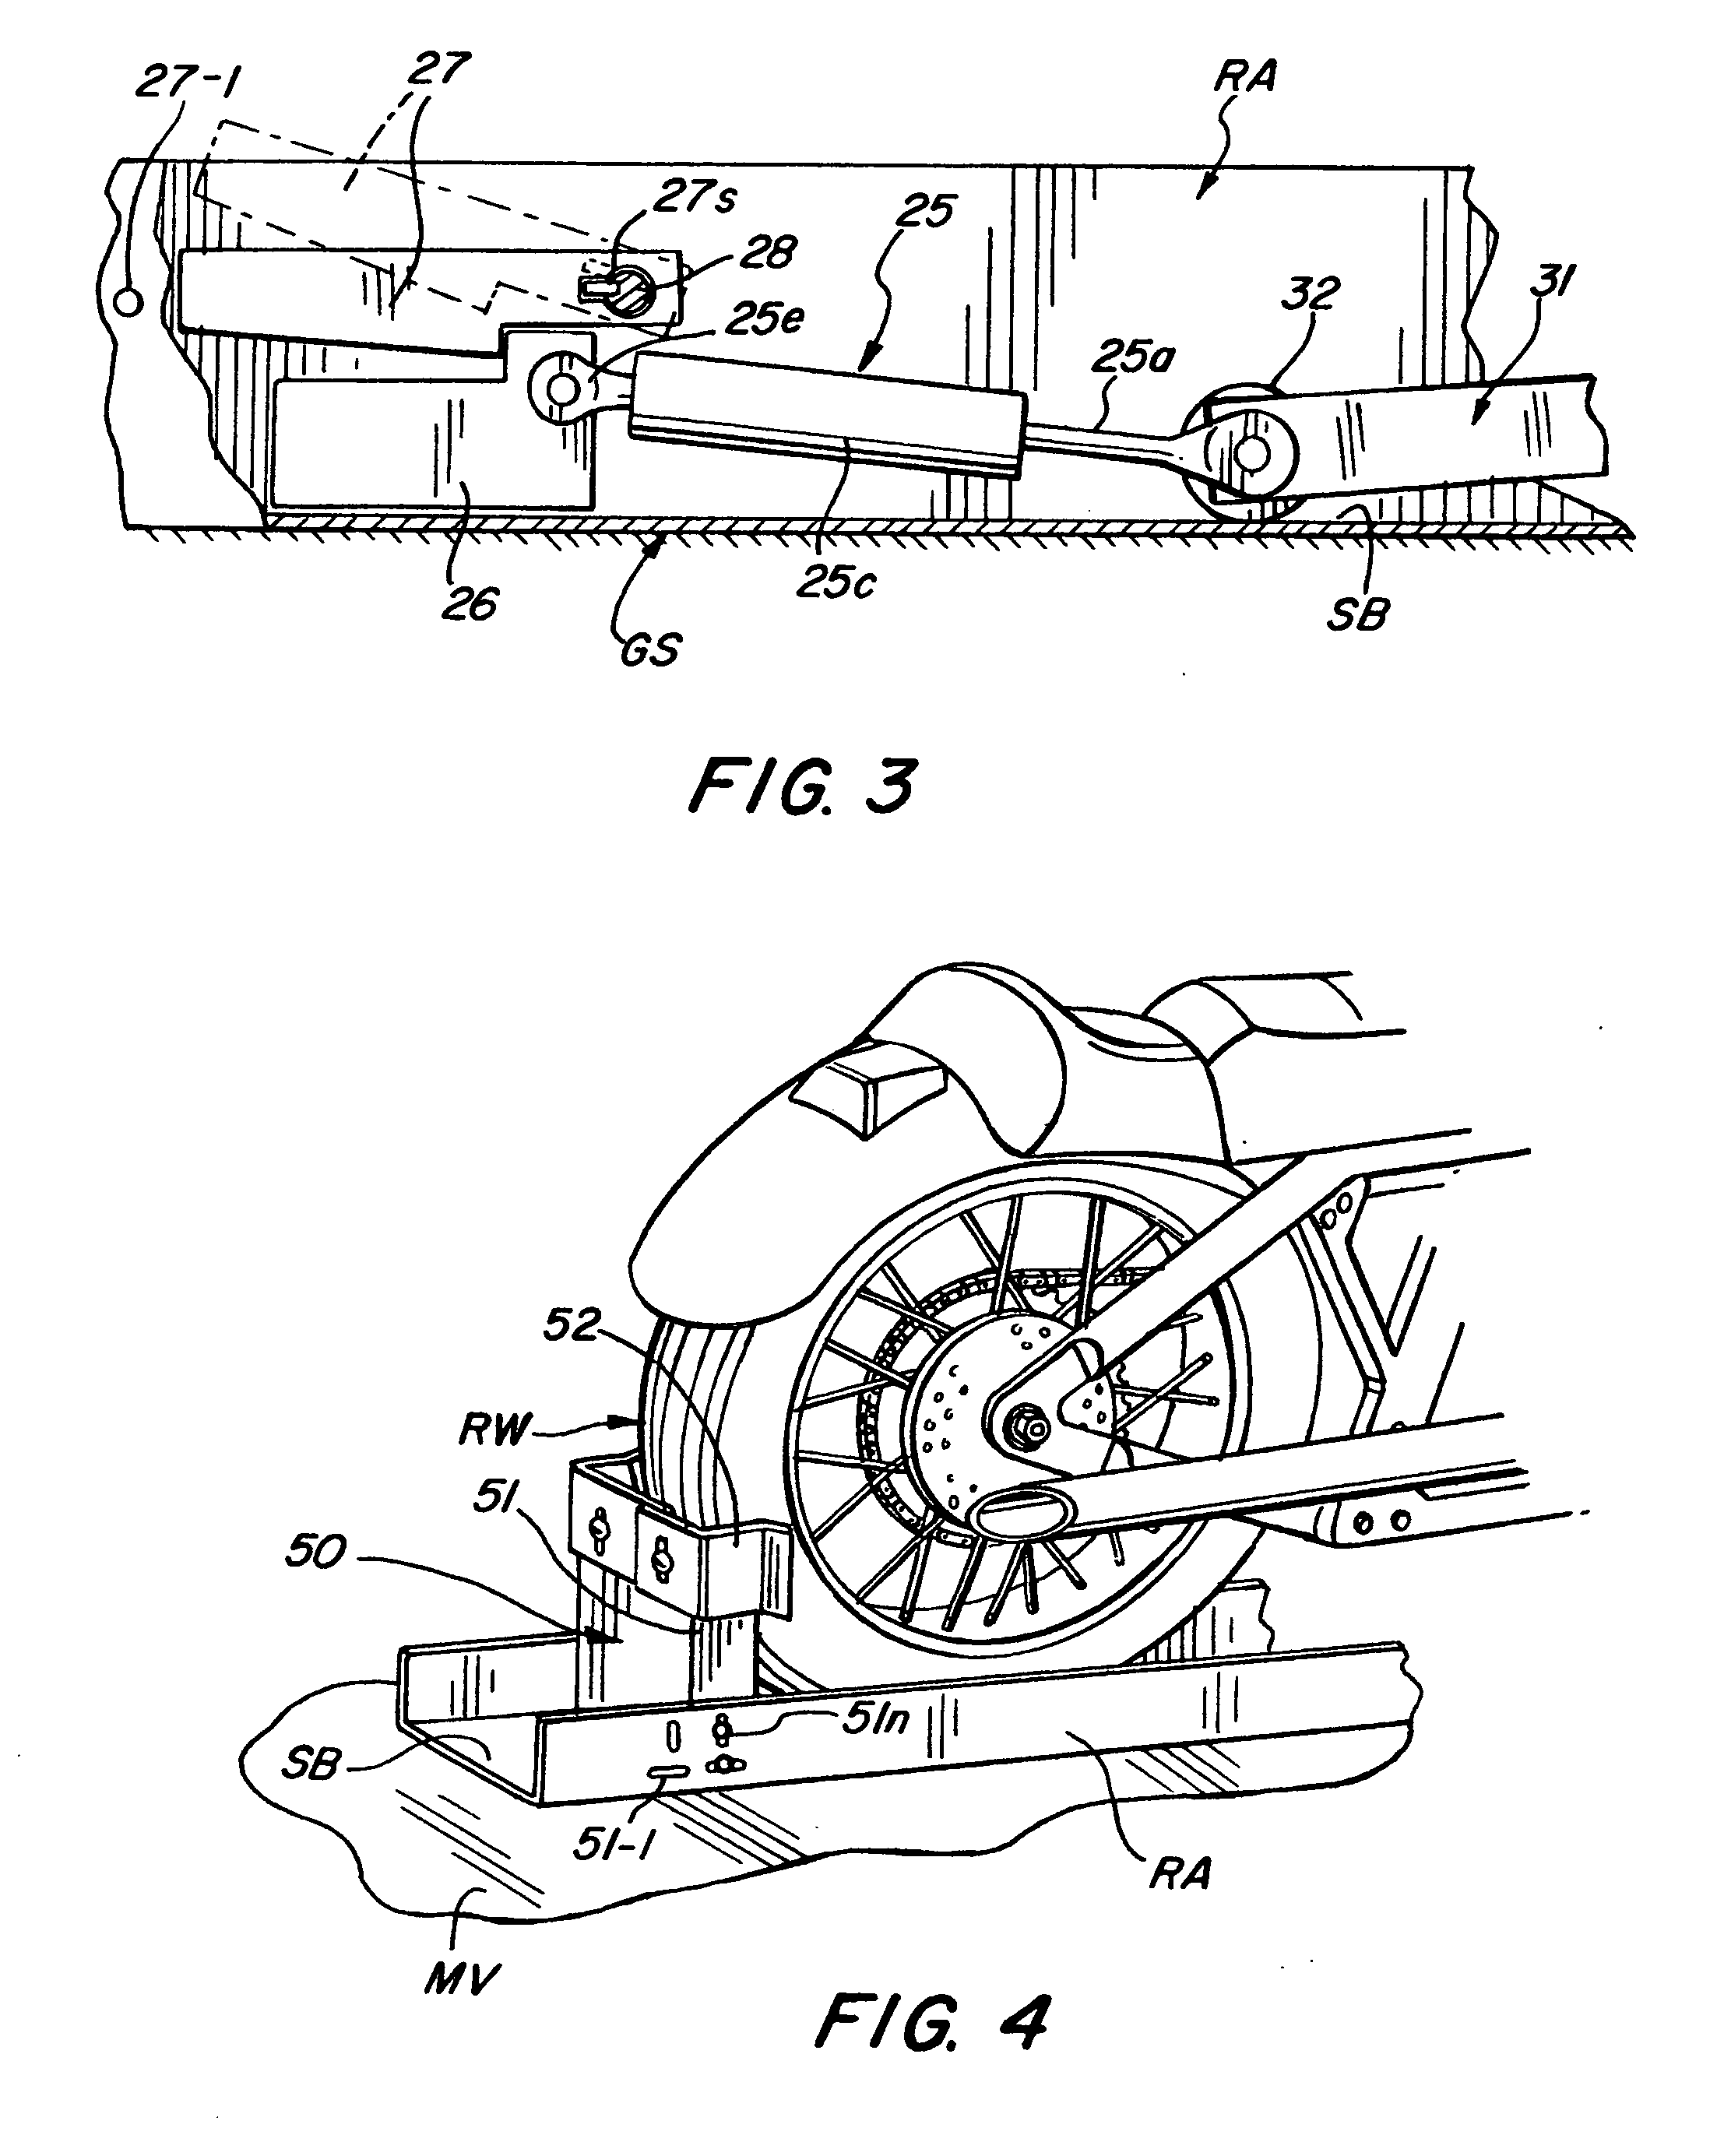 Apparatus for mounting a motorcycle on a carrier